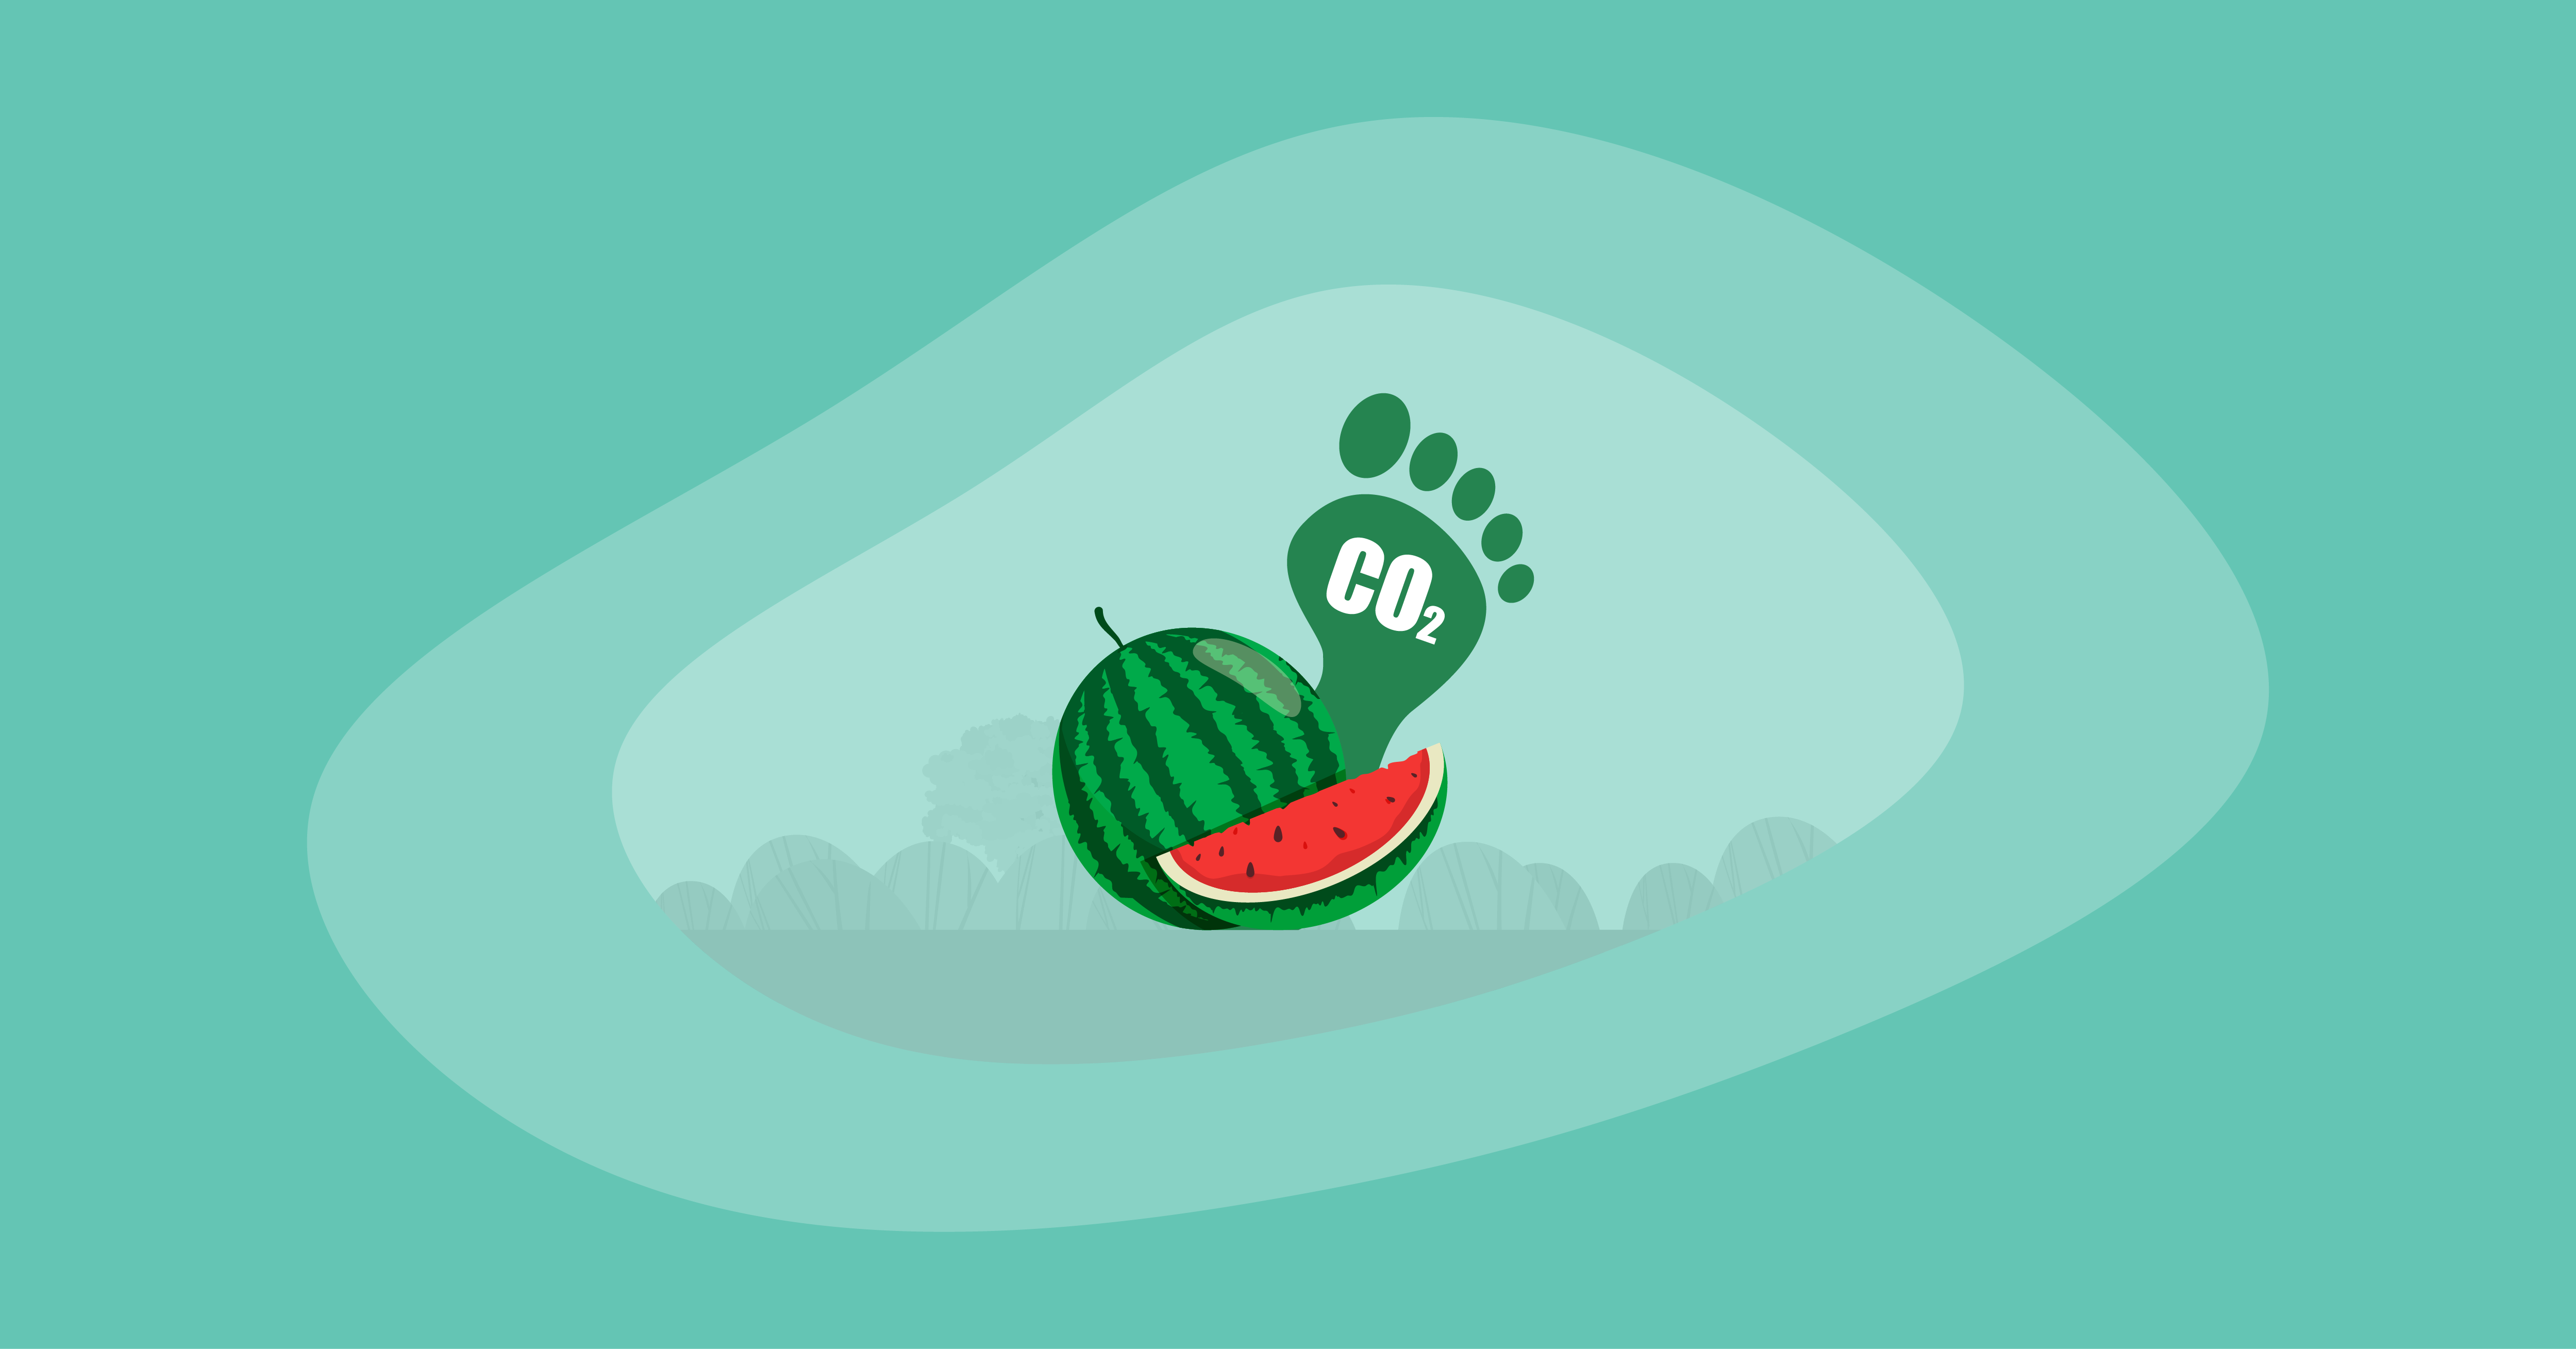 Attempted illustration of watermelons with their carbon footprint